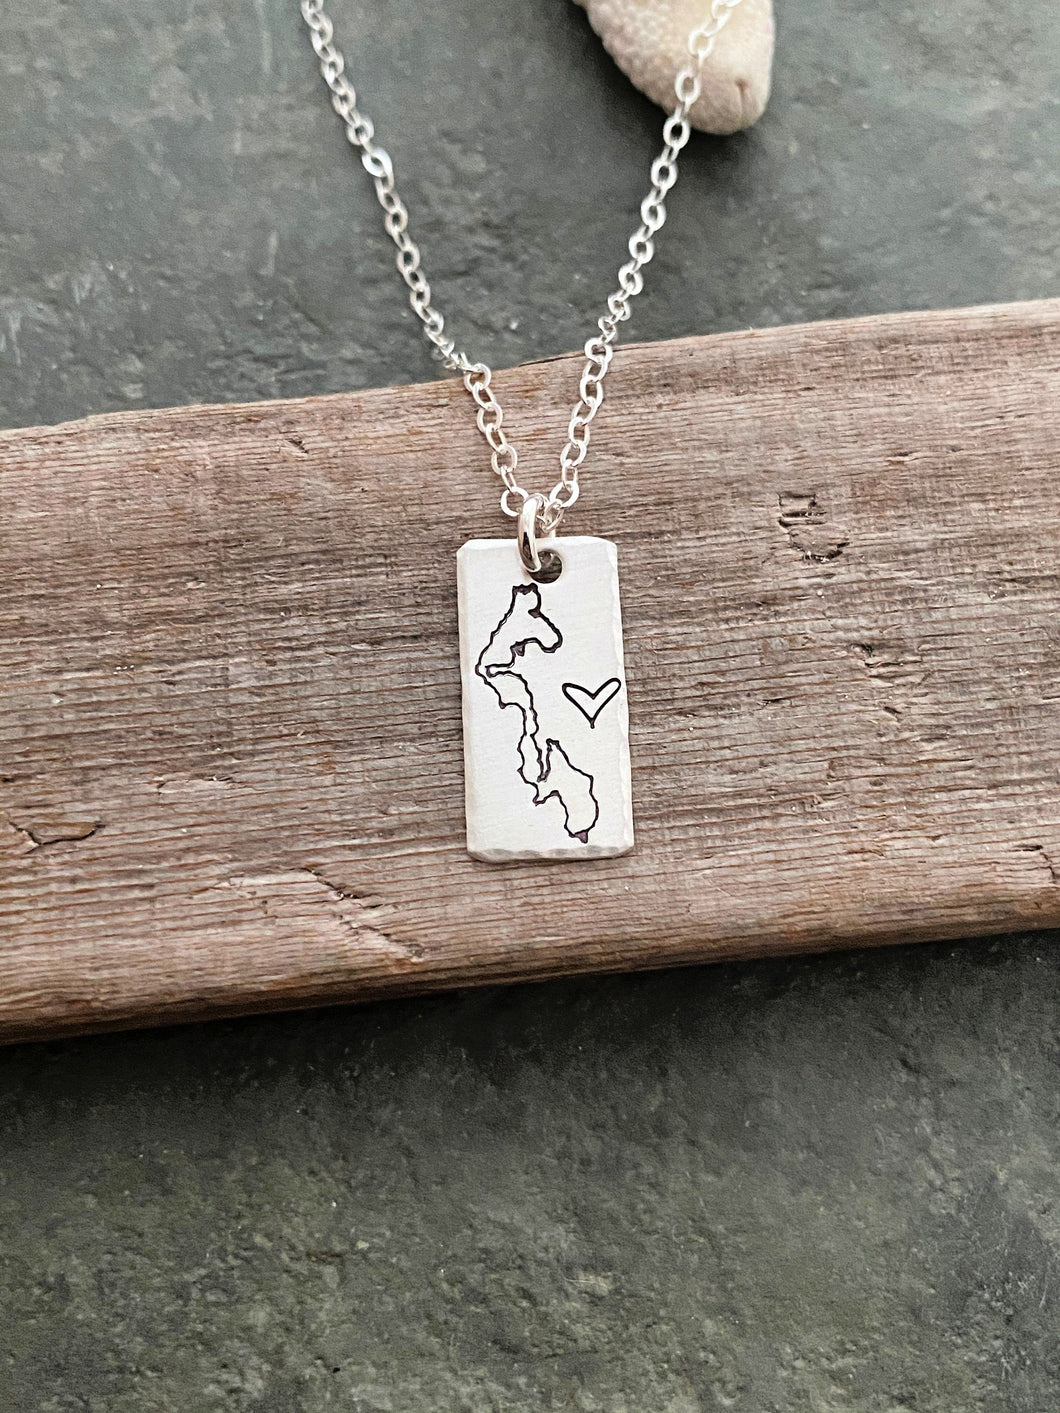 Whidbey Island Necklace - Hand stamped outline of Whidbey Island Washington State Sterling Bar with Sterling silver chain and Heart design